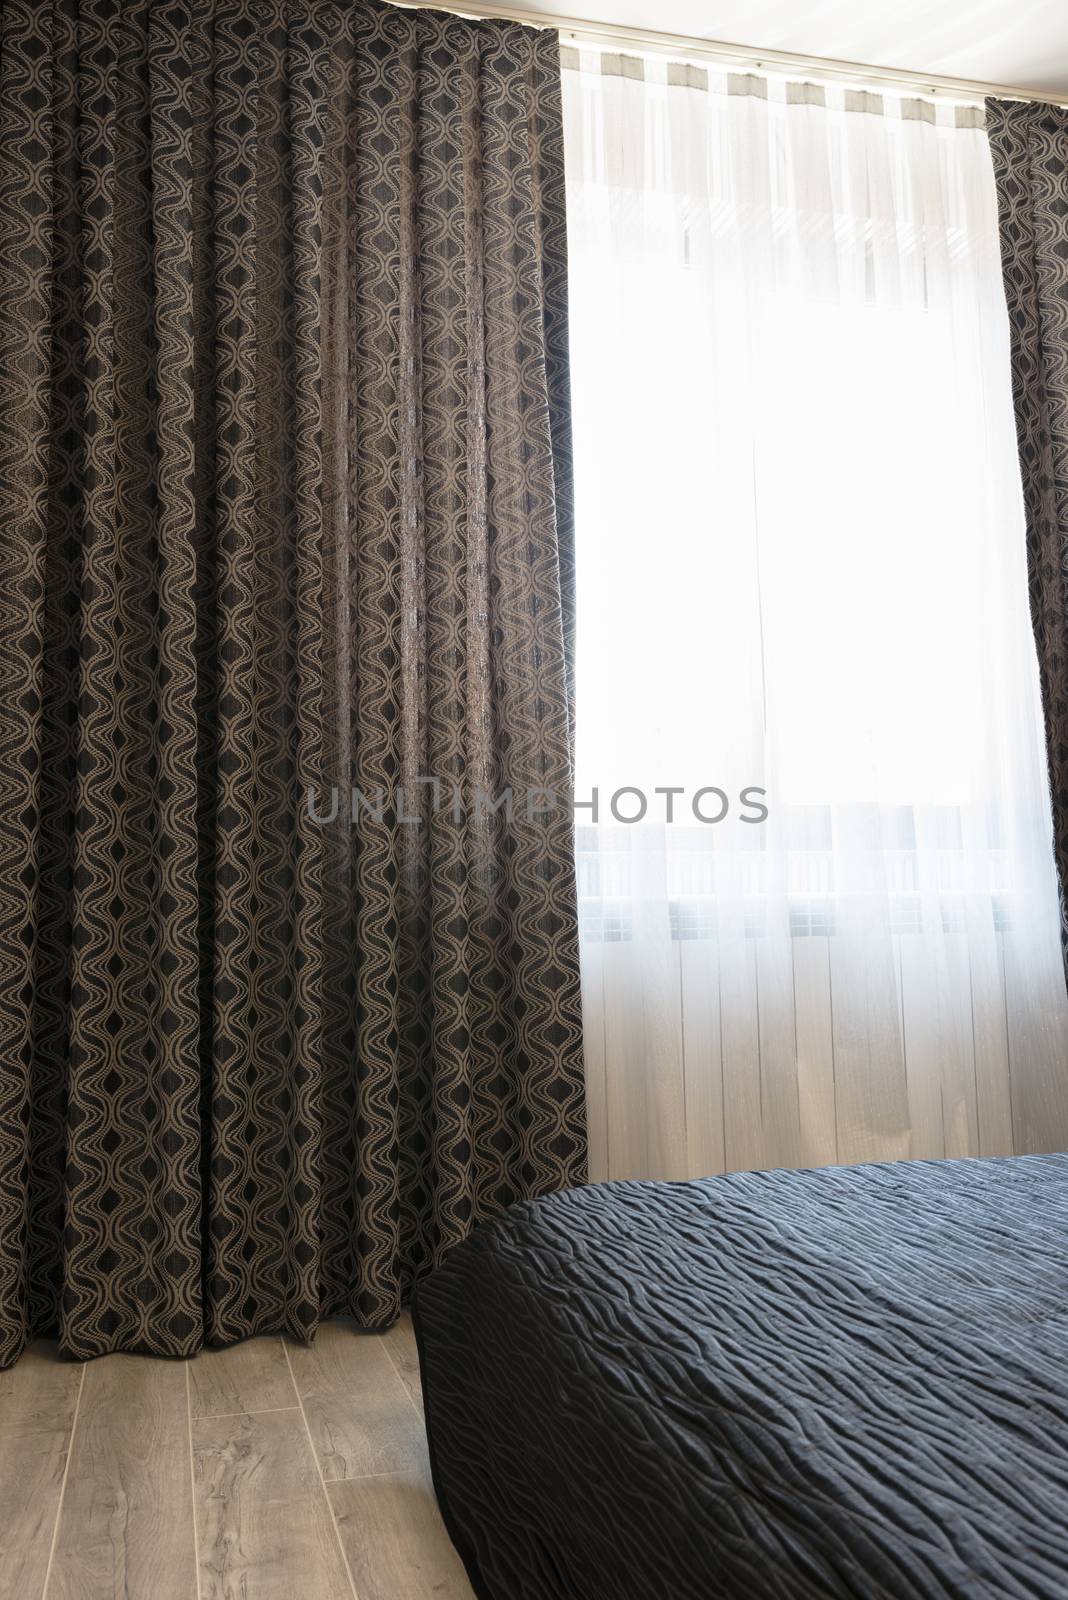 Long dark luxury curtains and tulle curtains, sheers on a window in the bedroom. Interior design concept